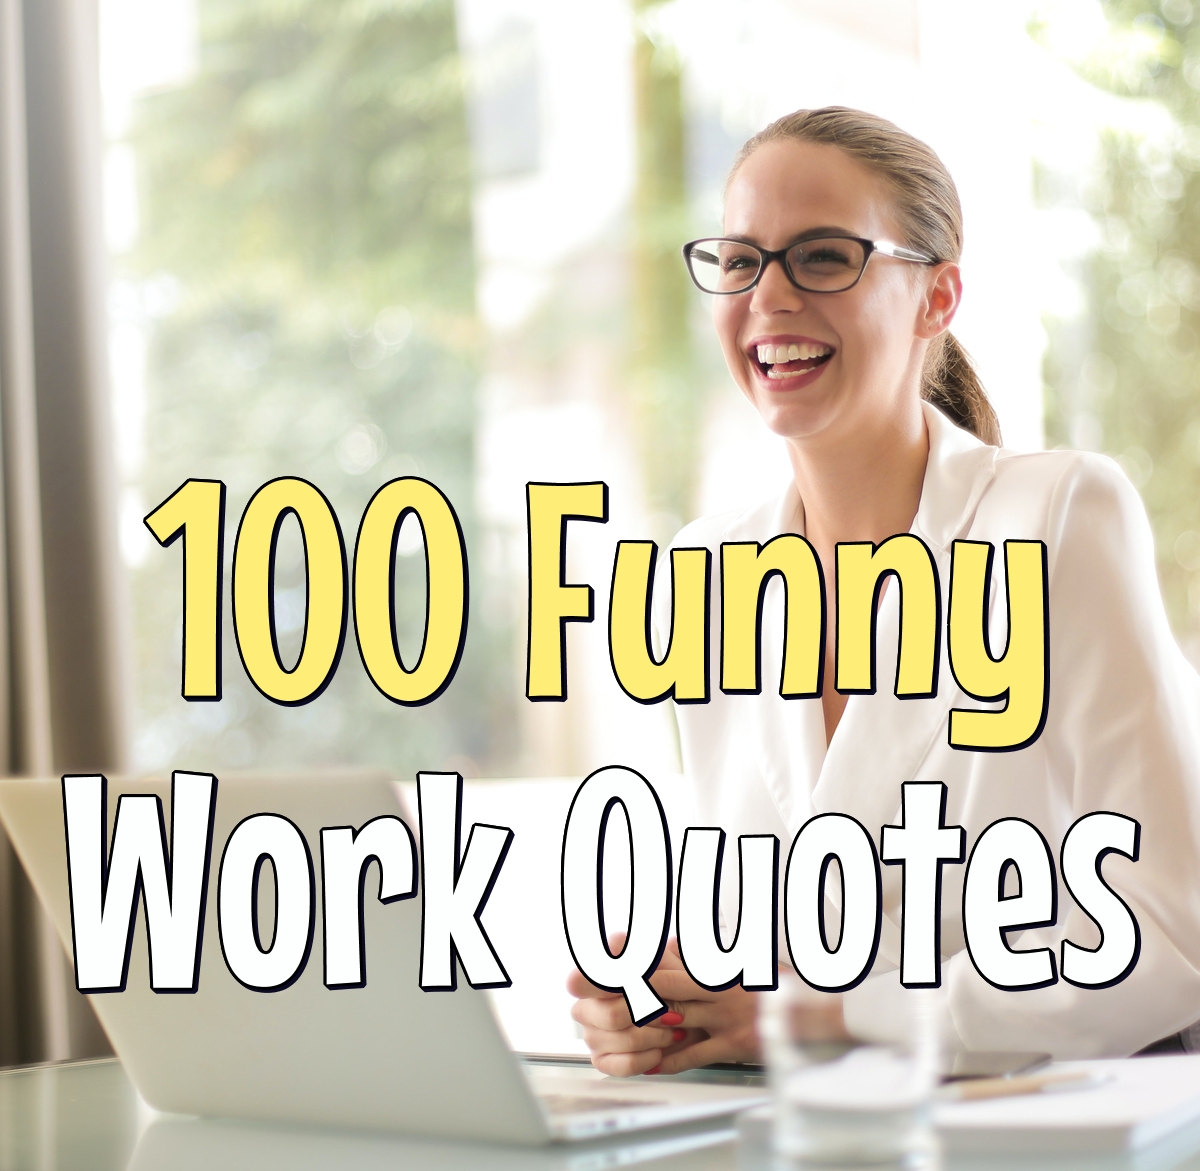 Work Quotes - Cool Funny Quotes